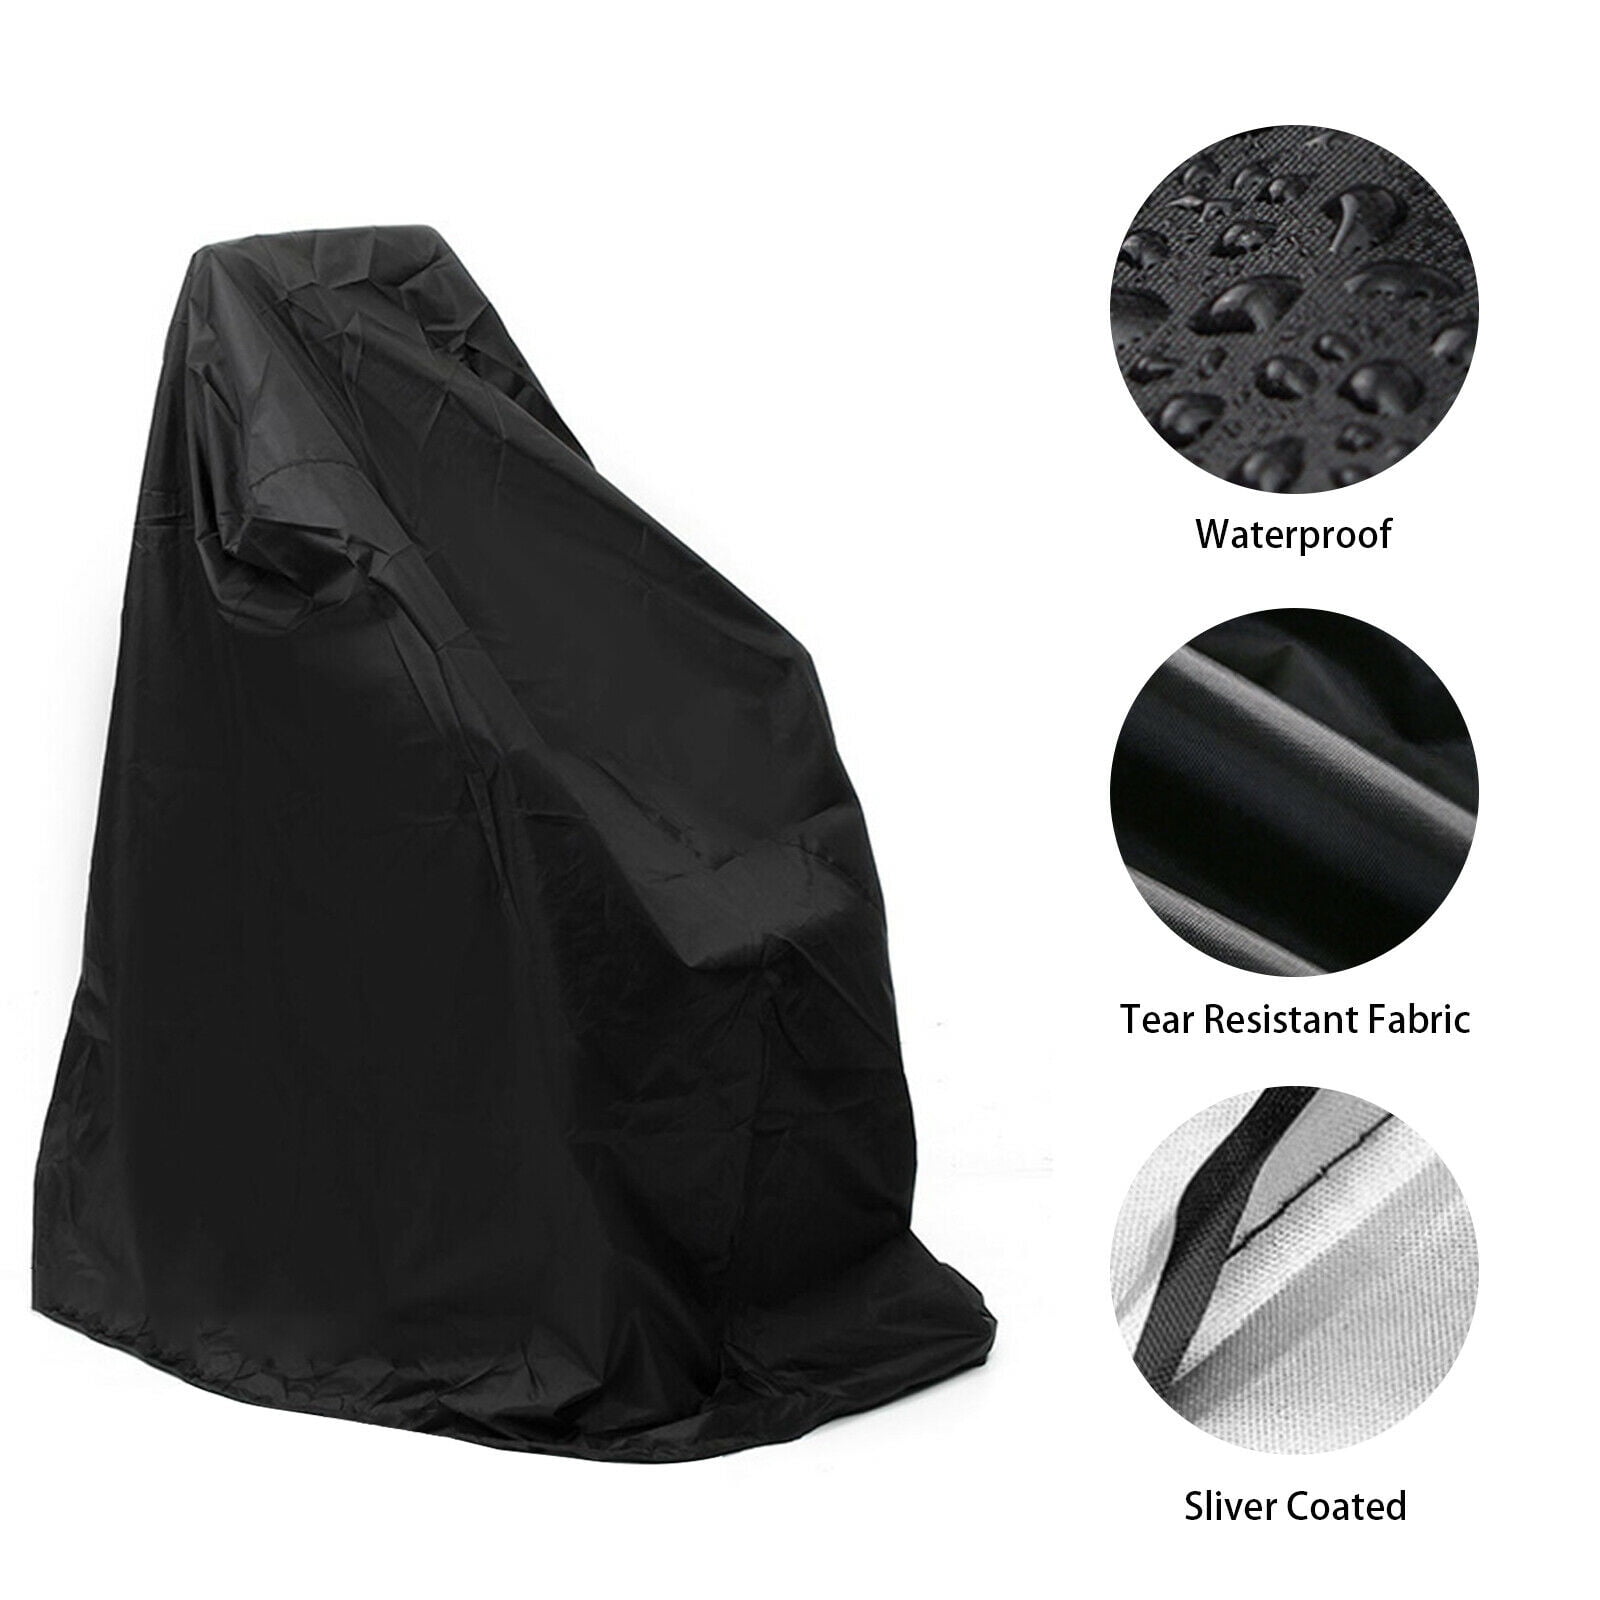 Mobility Scooter Storage Cover XL 420D Oxford Fabric Scooter Weather Cover Electric Wheelchair Cover Waterproof for Travel Outdoor Street Touring 48 L x 22 D x 38 H 